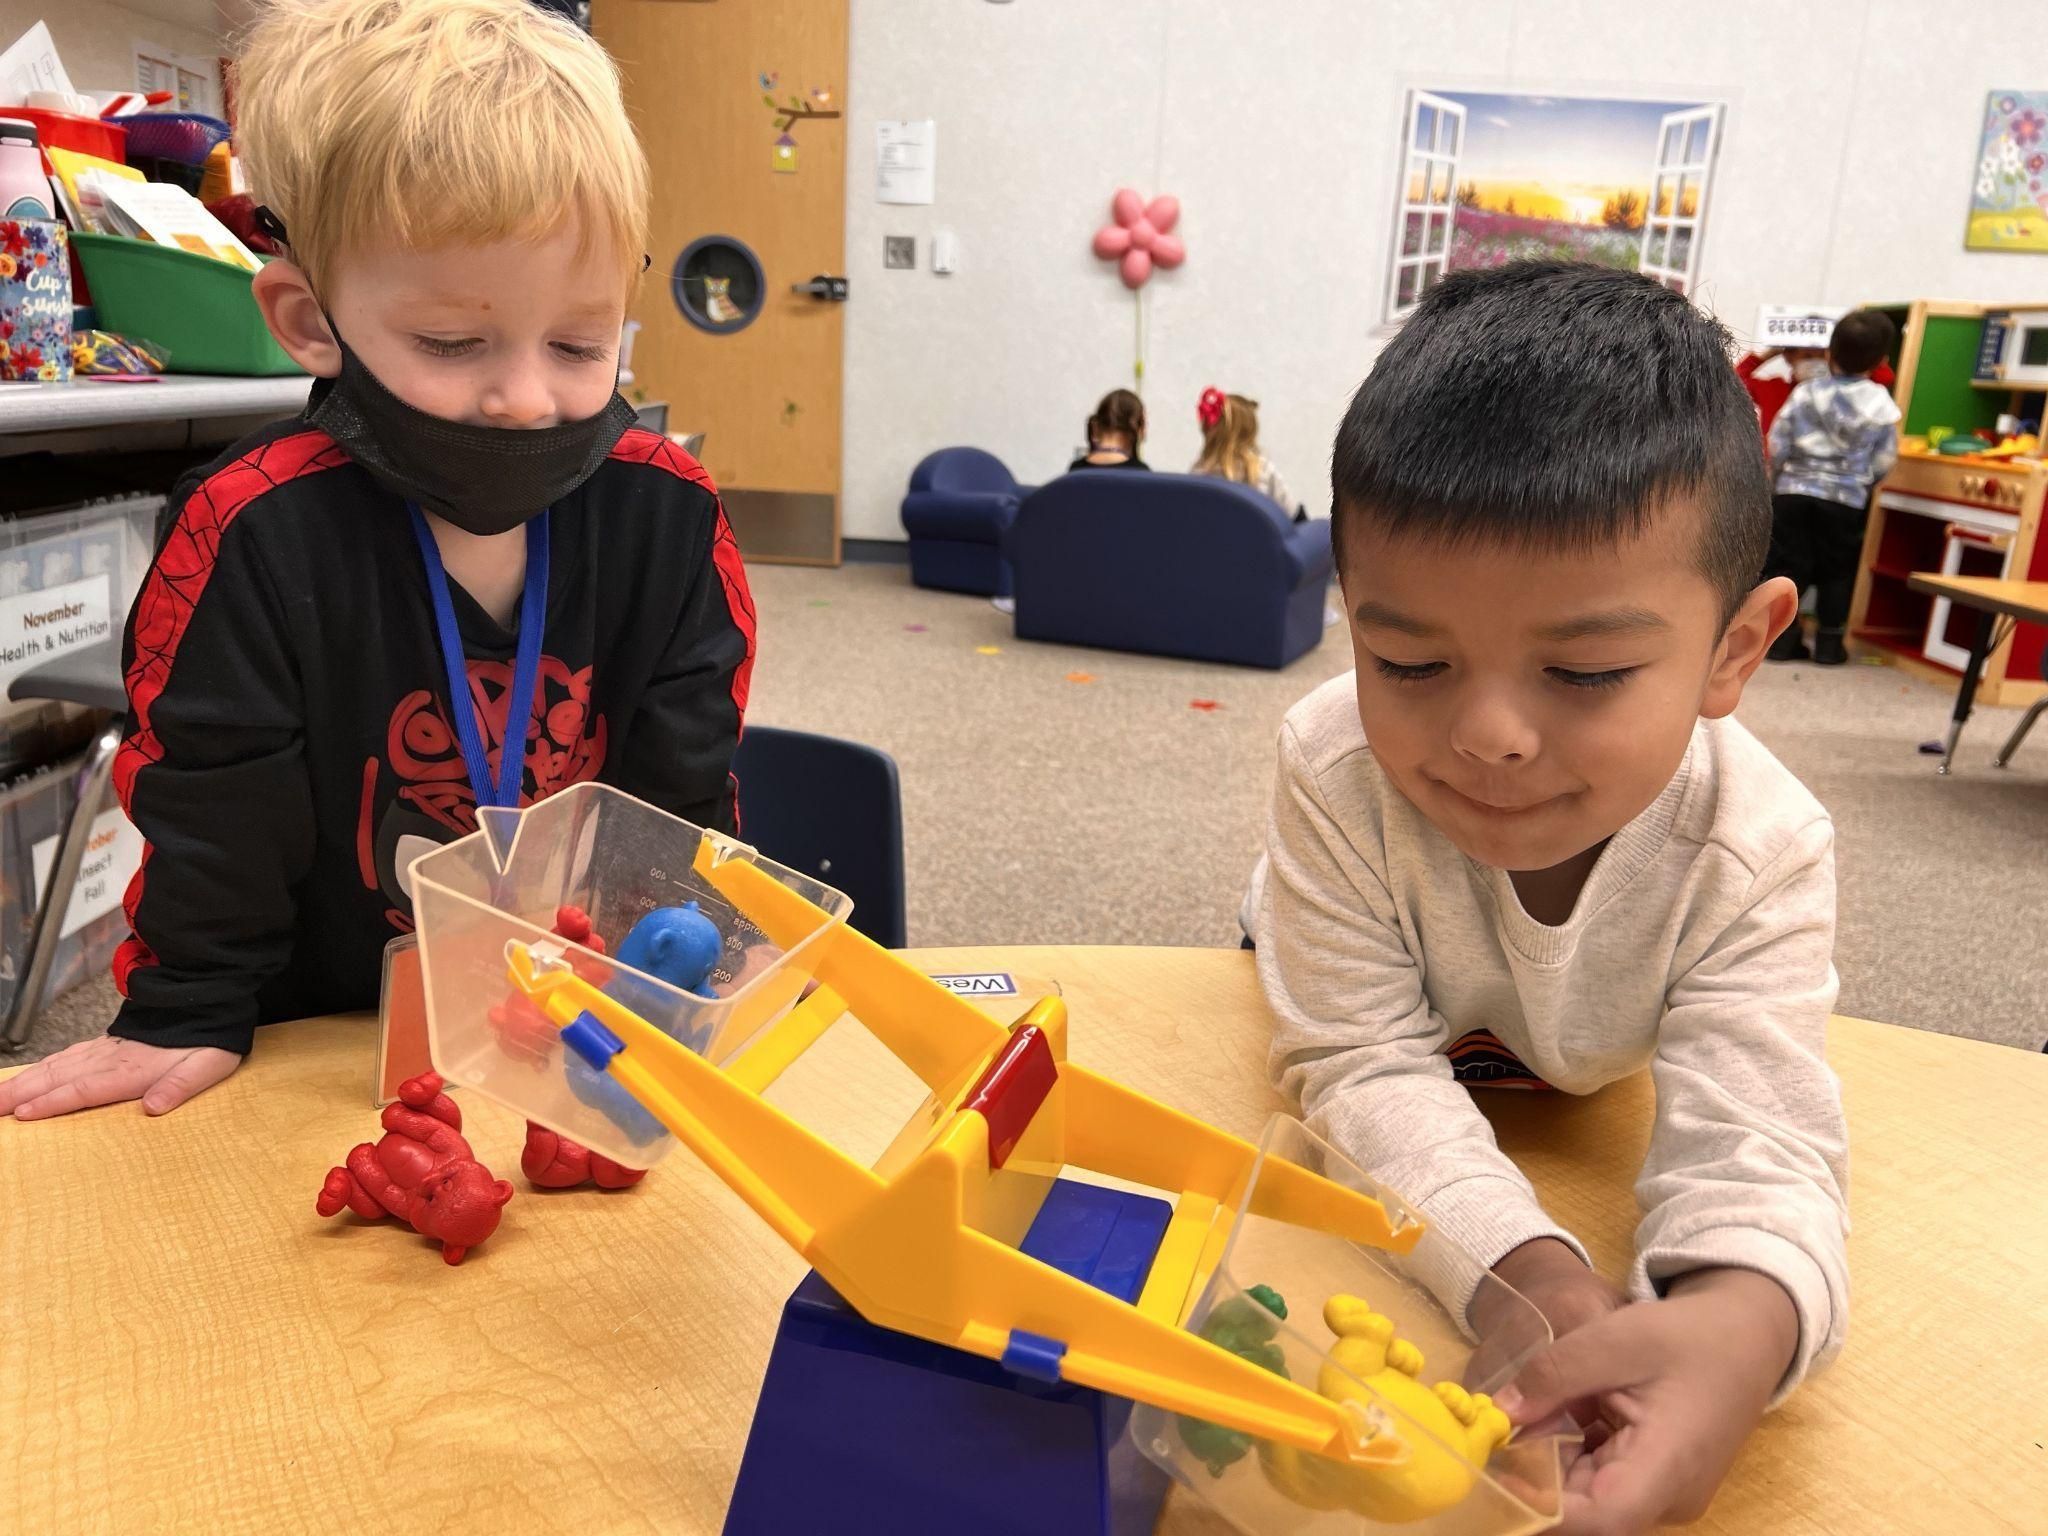 Room to Grow: Preschool Access to Expand